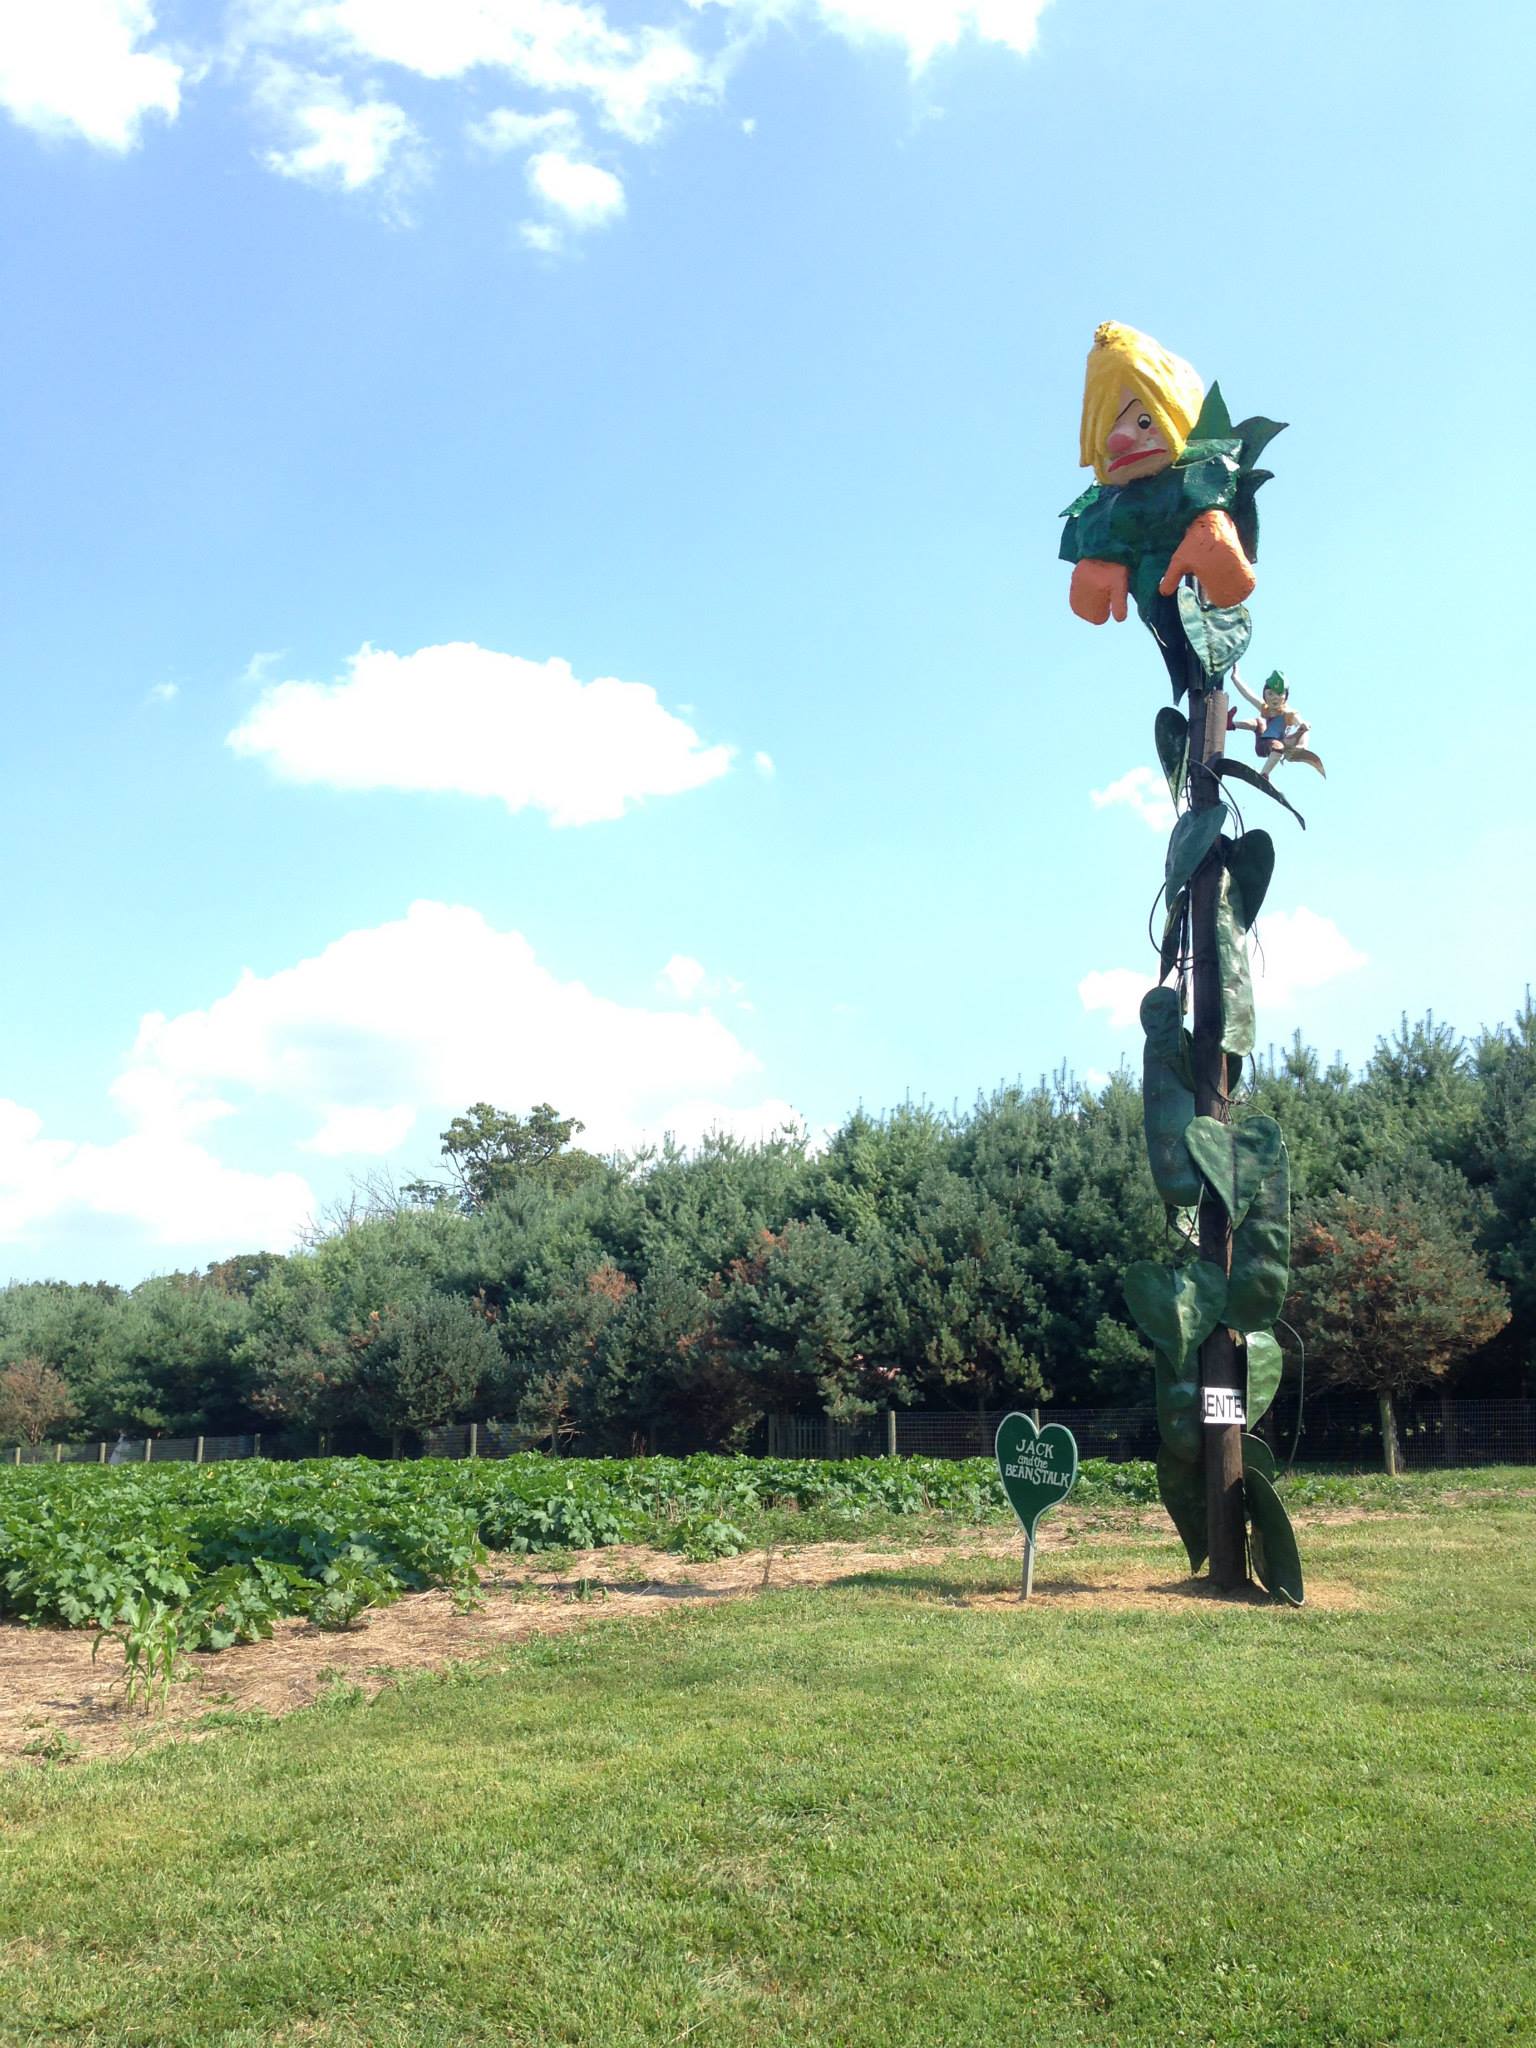 Field with large beanstalk sculpture from the Enchanted Forest